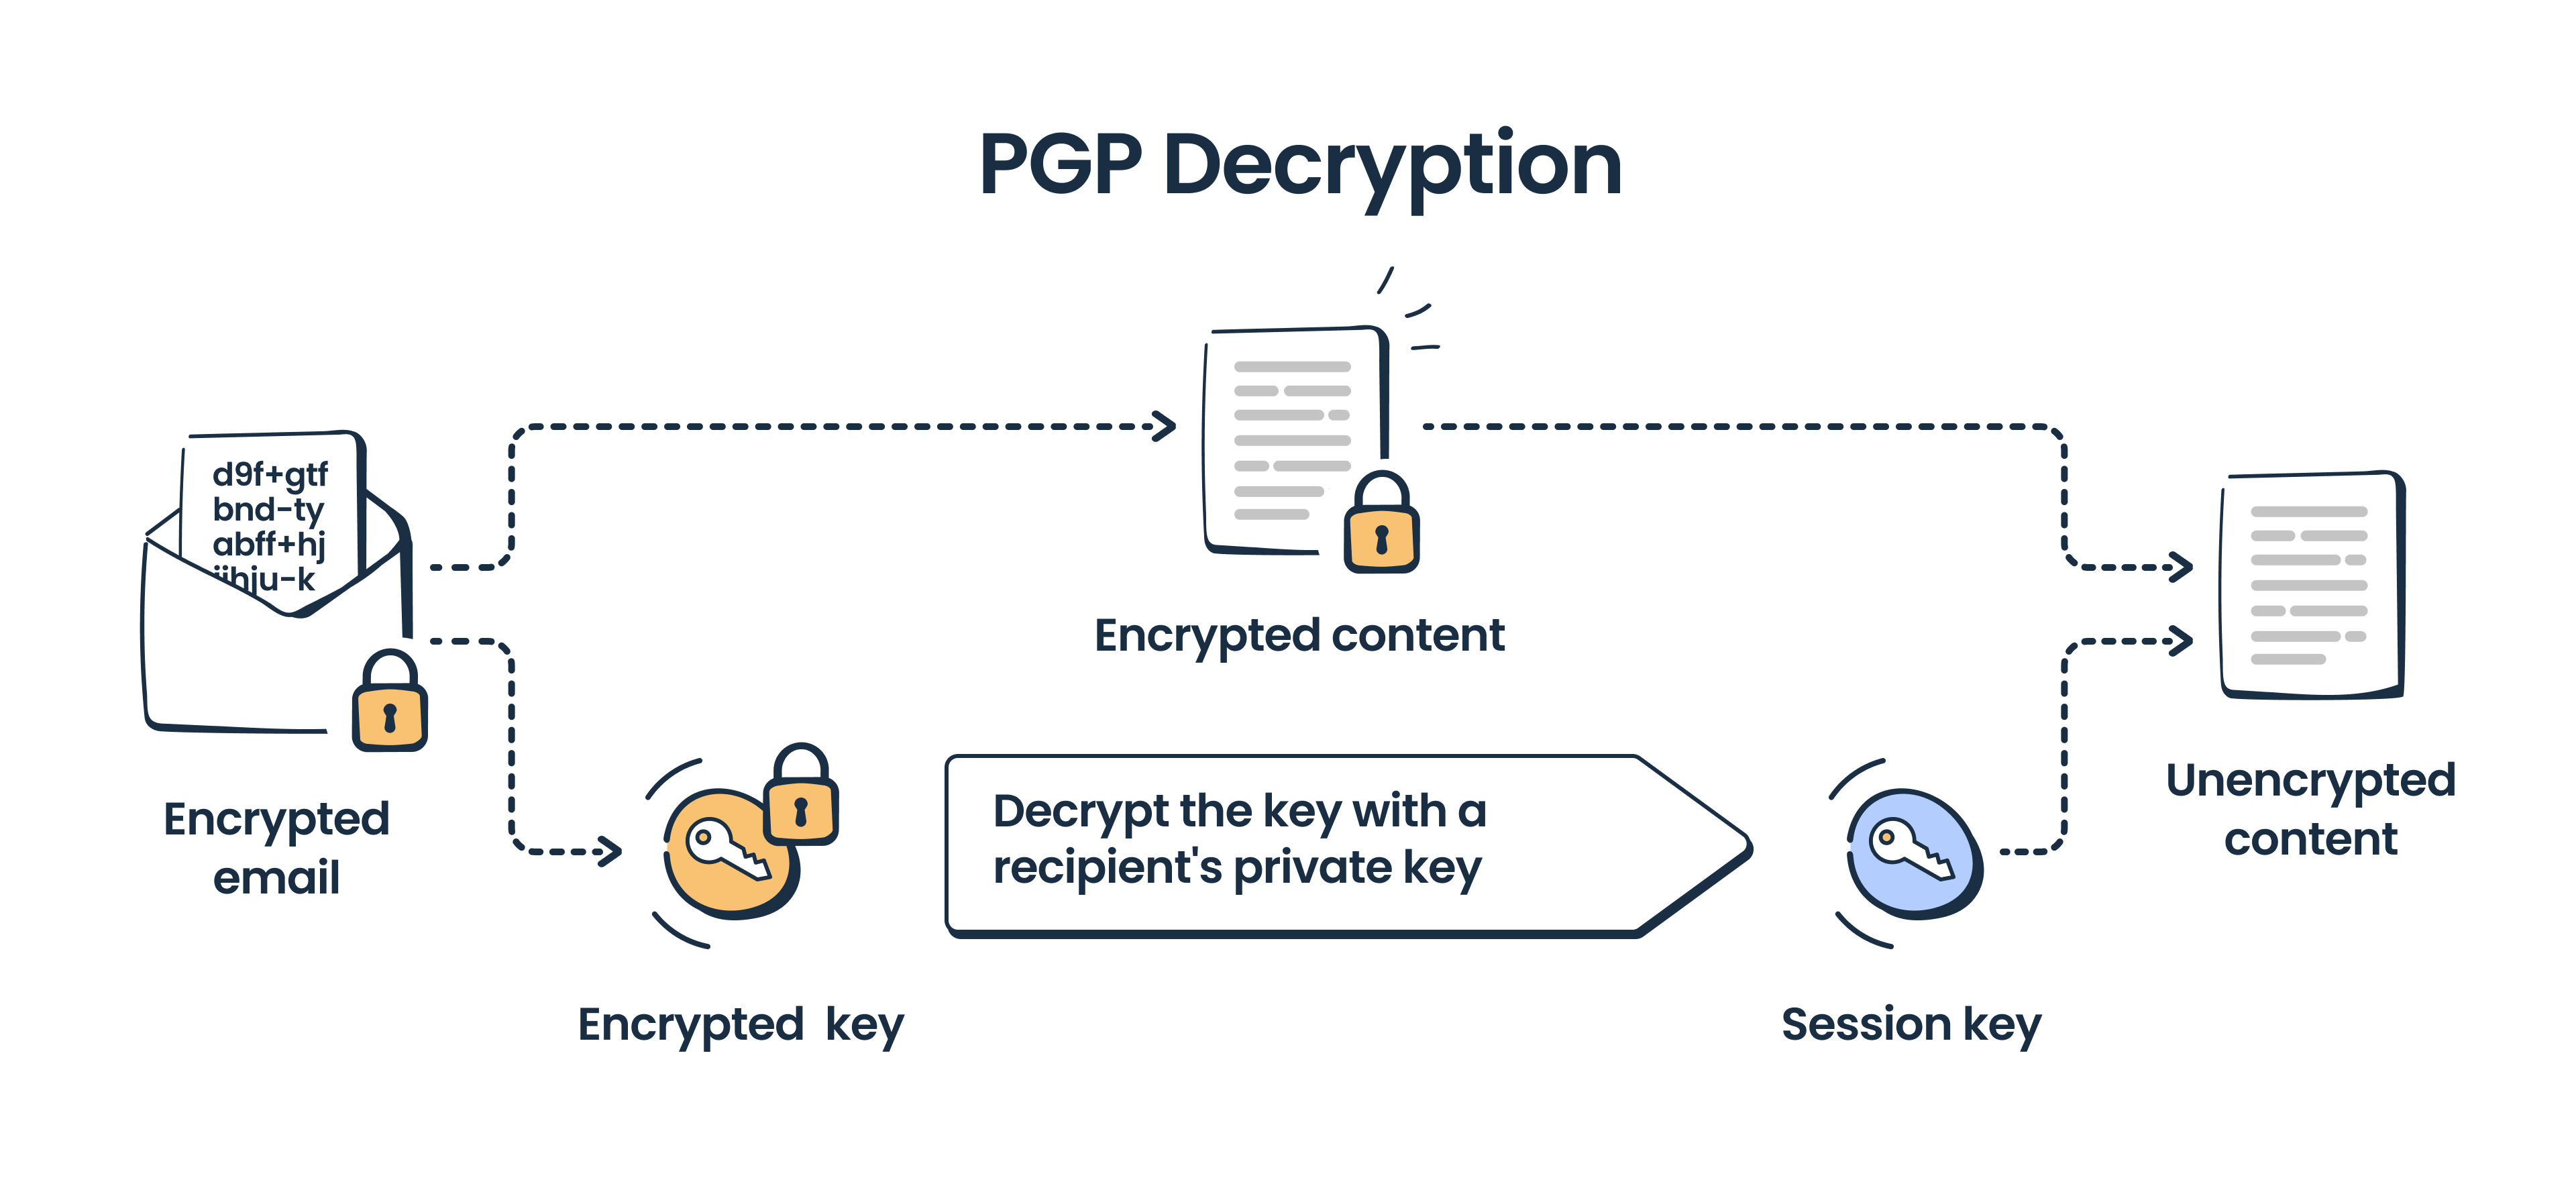 This is an image showing an illustration of PGP decryption 